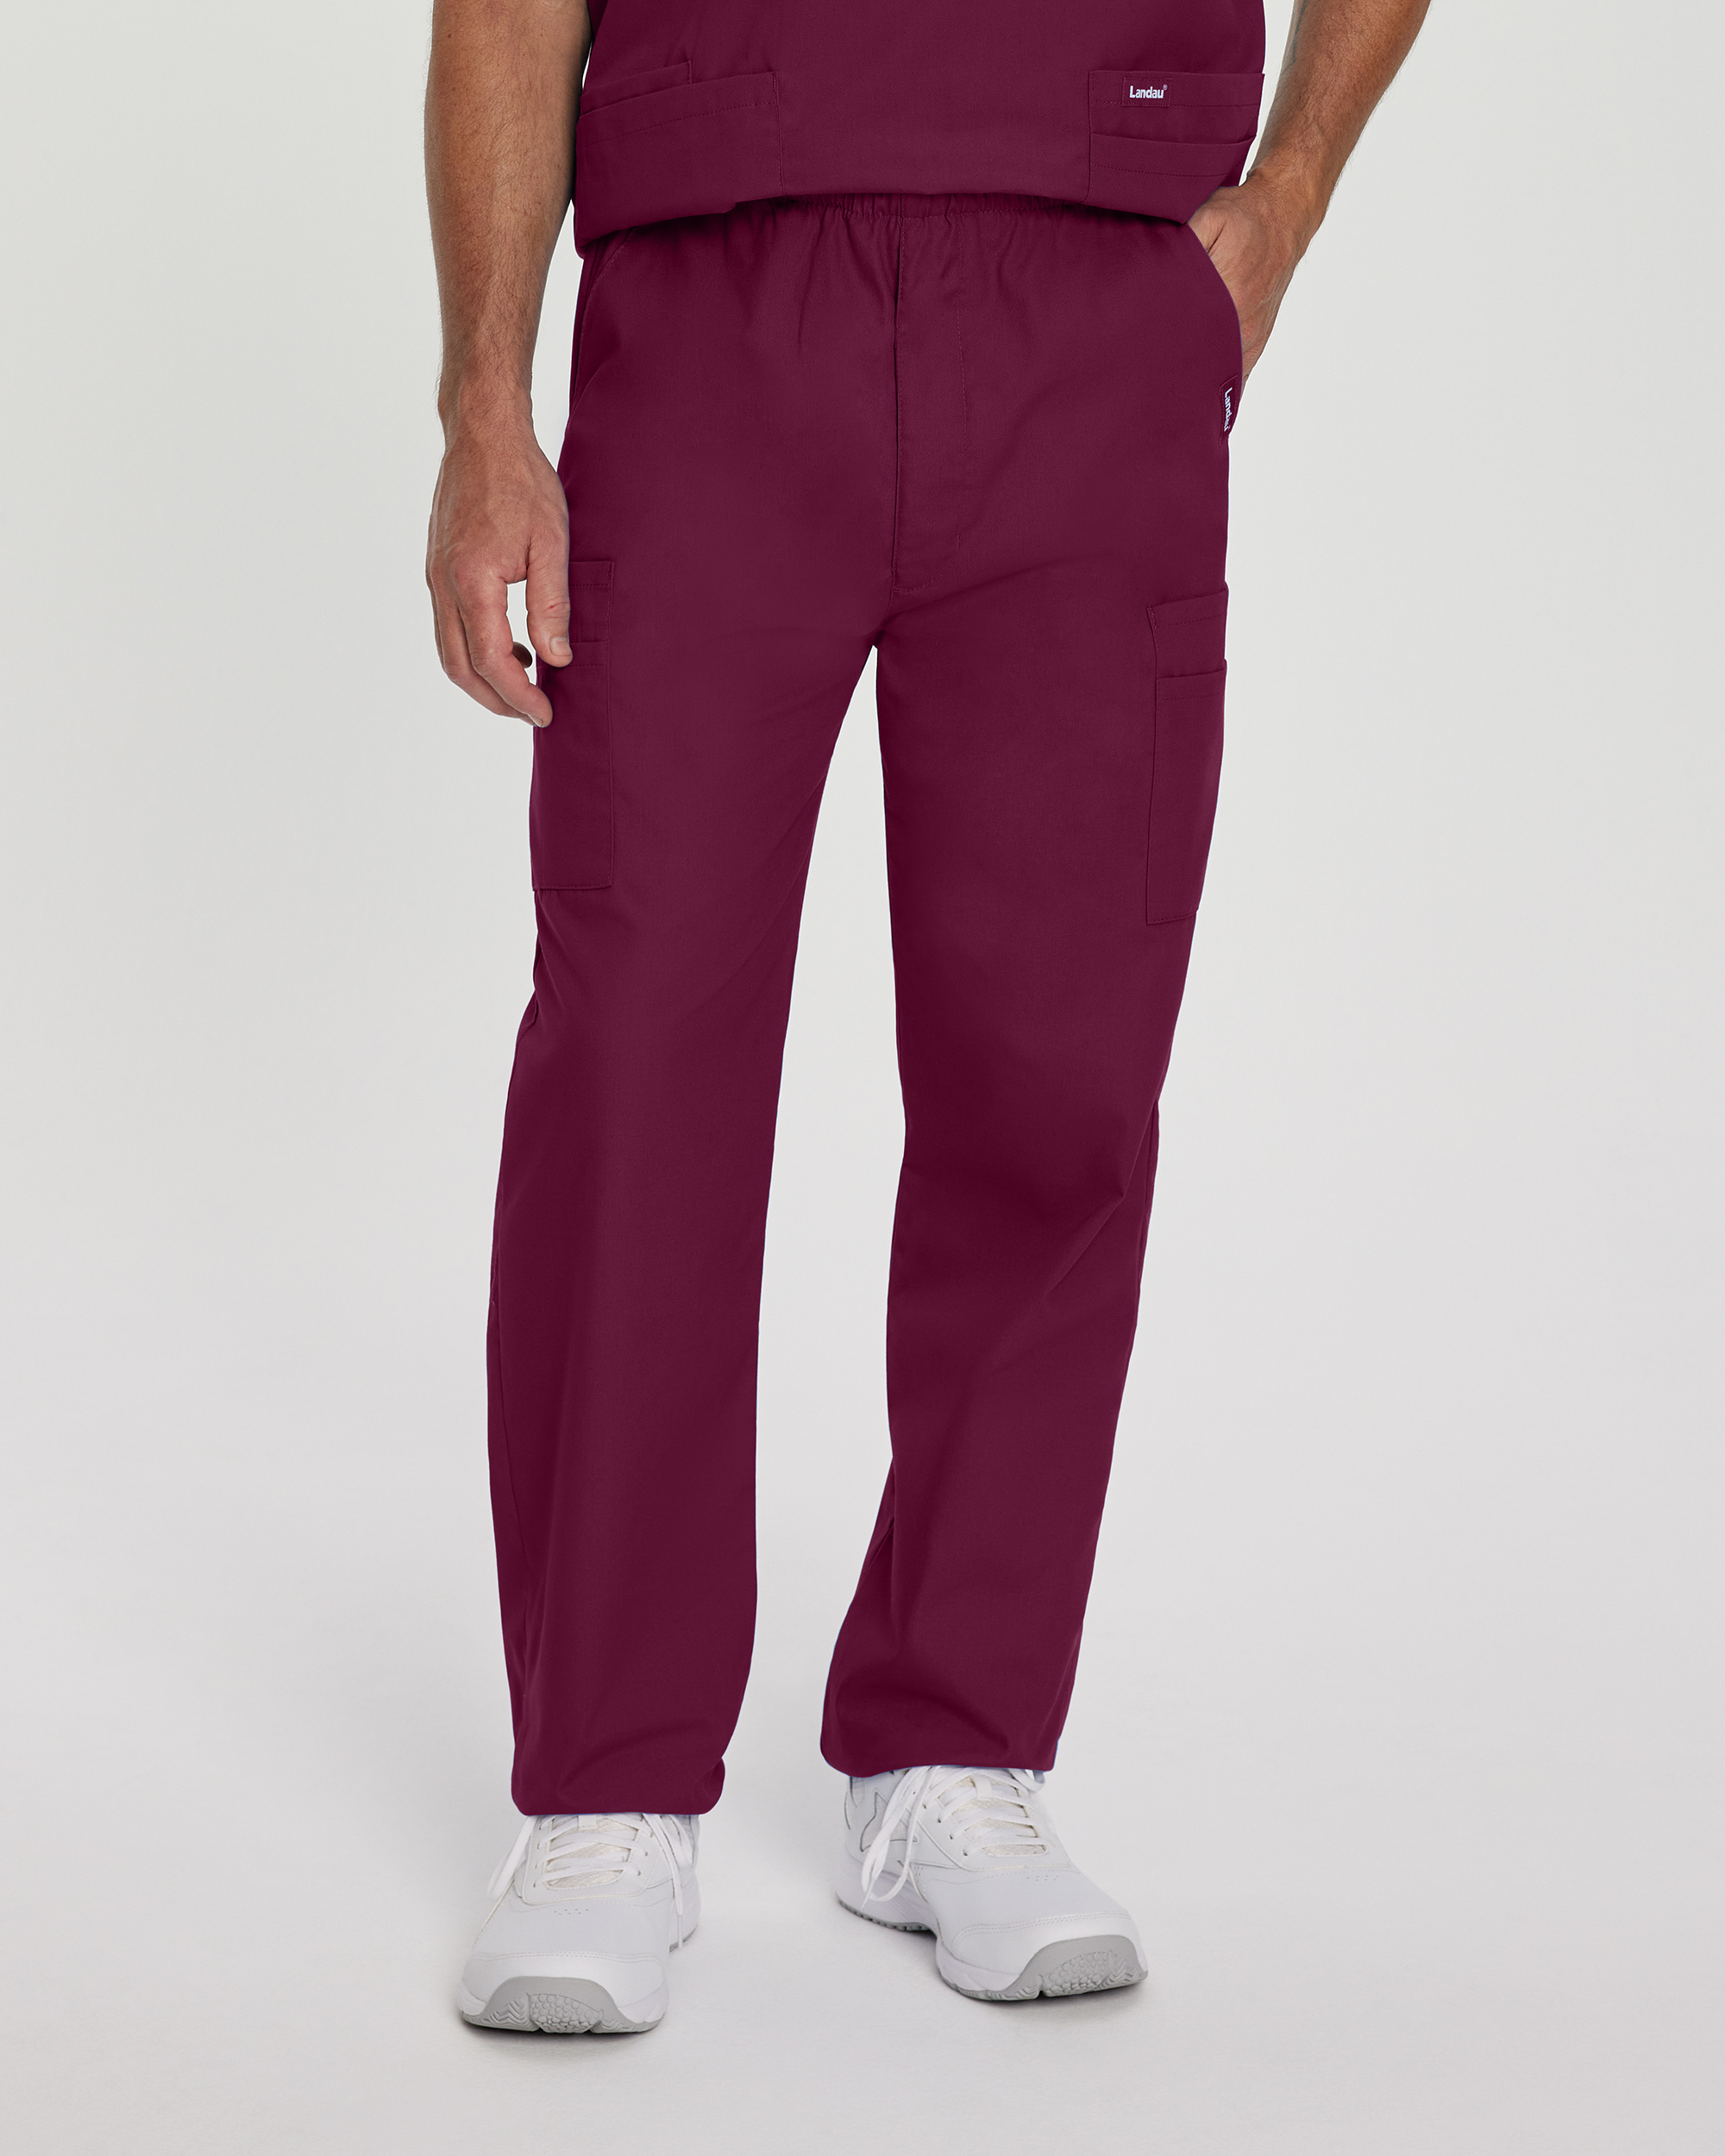 Landau Essentials Scrub Pants for Men: Classic Pull-On Cargo Stretch Scrubs with Zipper Front, 7 Pocket Medical Scrubs 8555 Questions & Answers